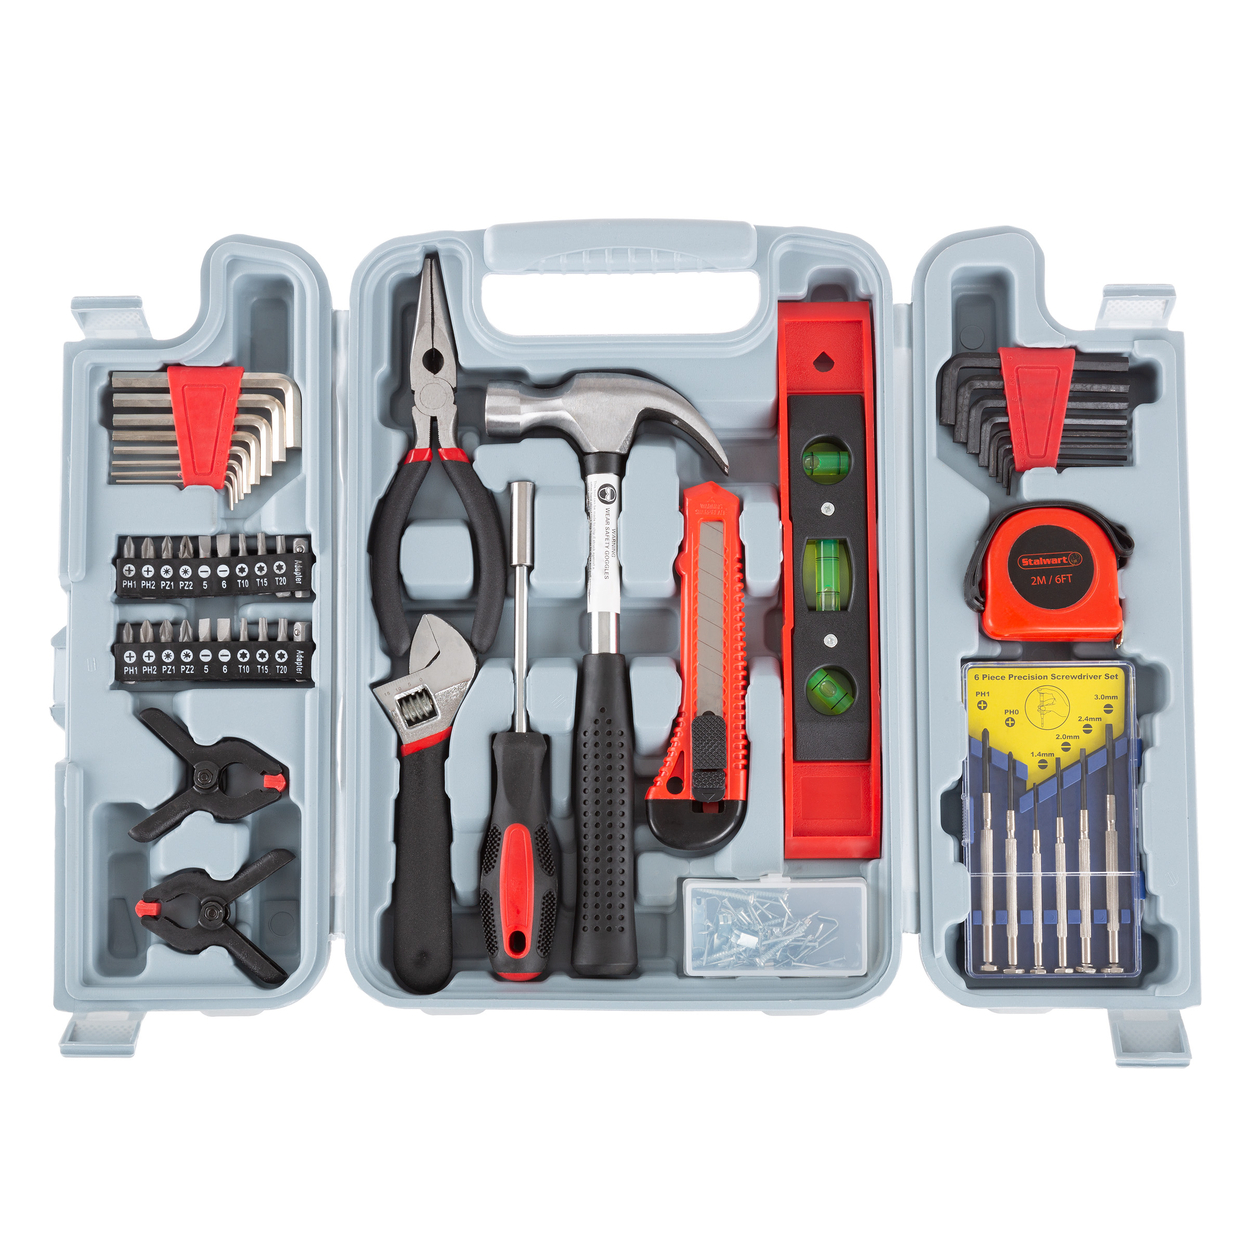 132 Pieces Tool Kit With Carrying Case Essential Hand Tool Set For Home